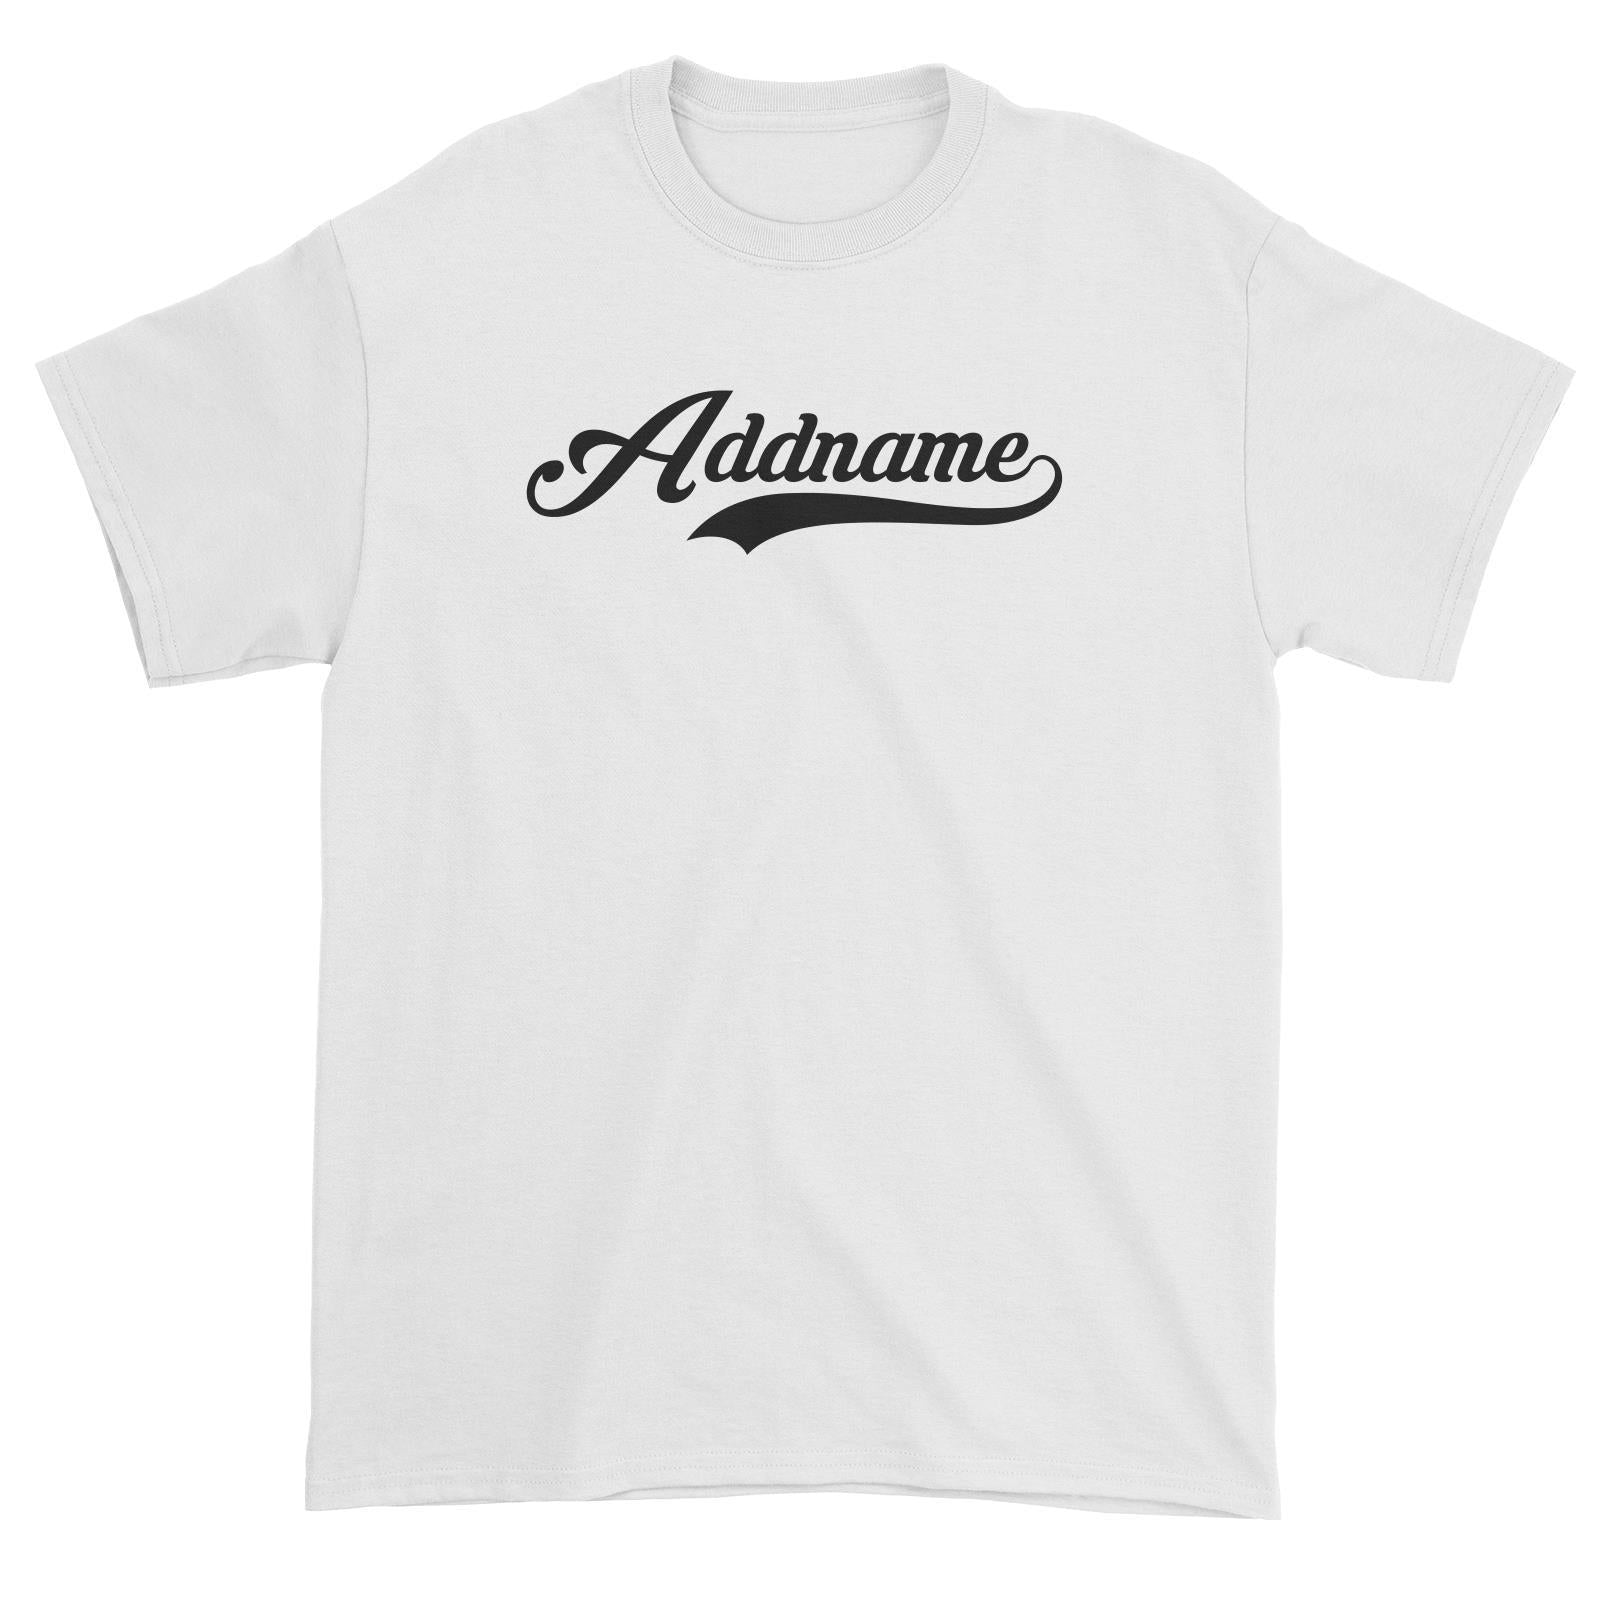 Retro Addname Unisex T-Shirt  Matching Family Personalizable Designs